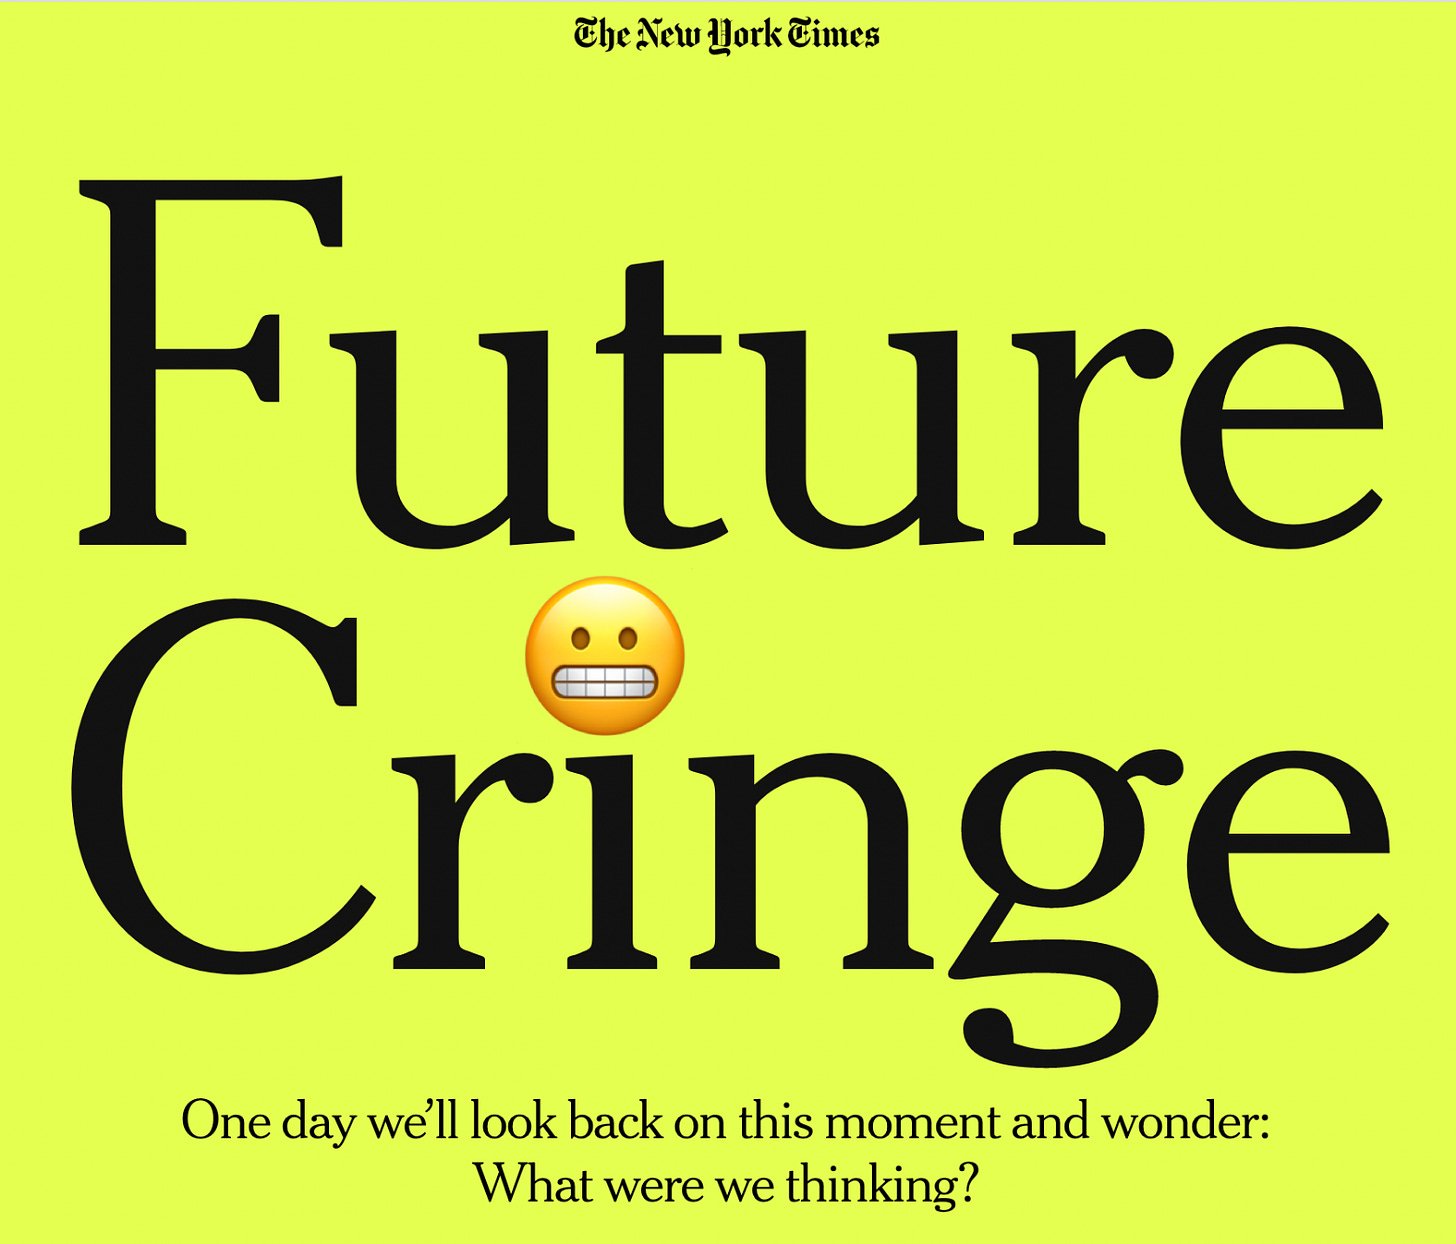 The New York Times
Future Cringe
One day we'll look back on this moment and wonder:
What were we thinking?